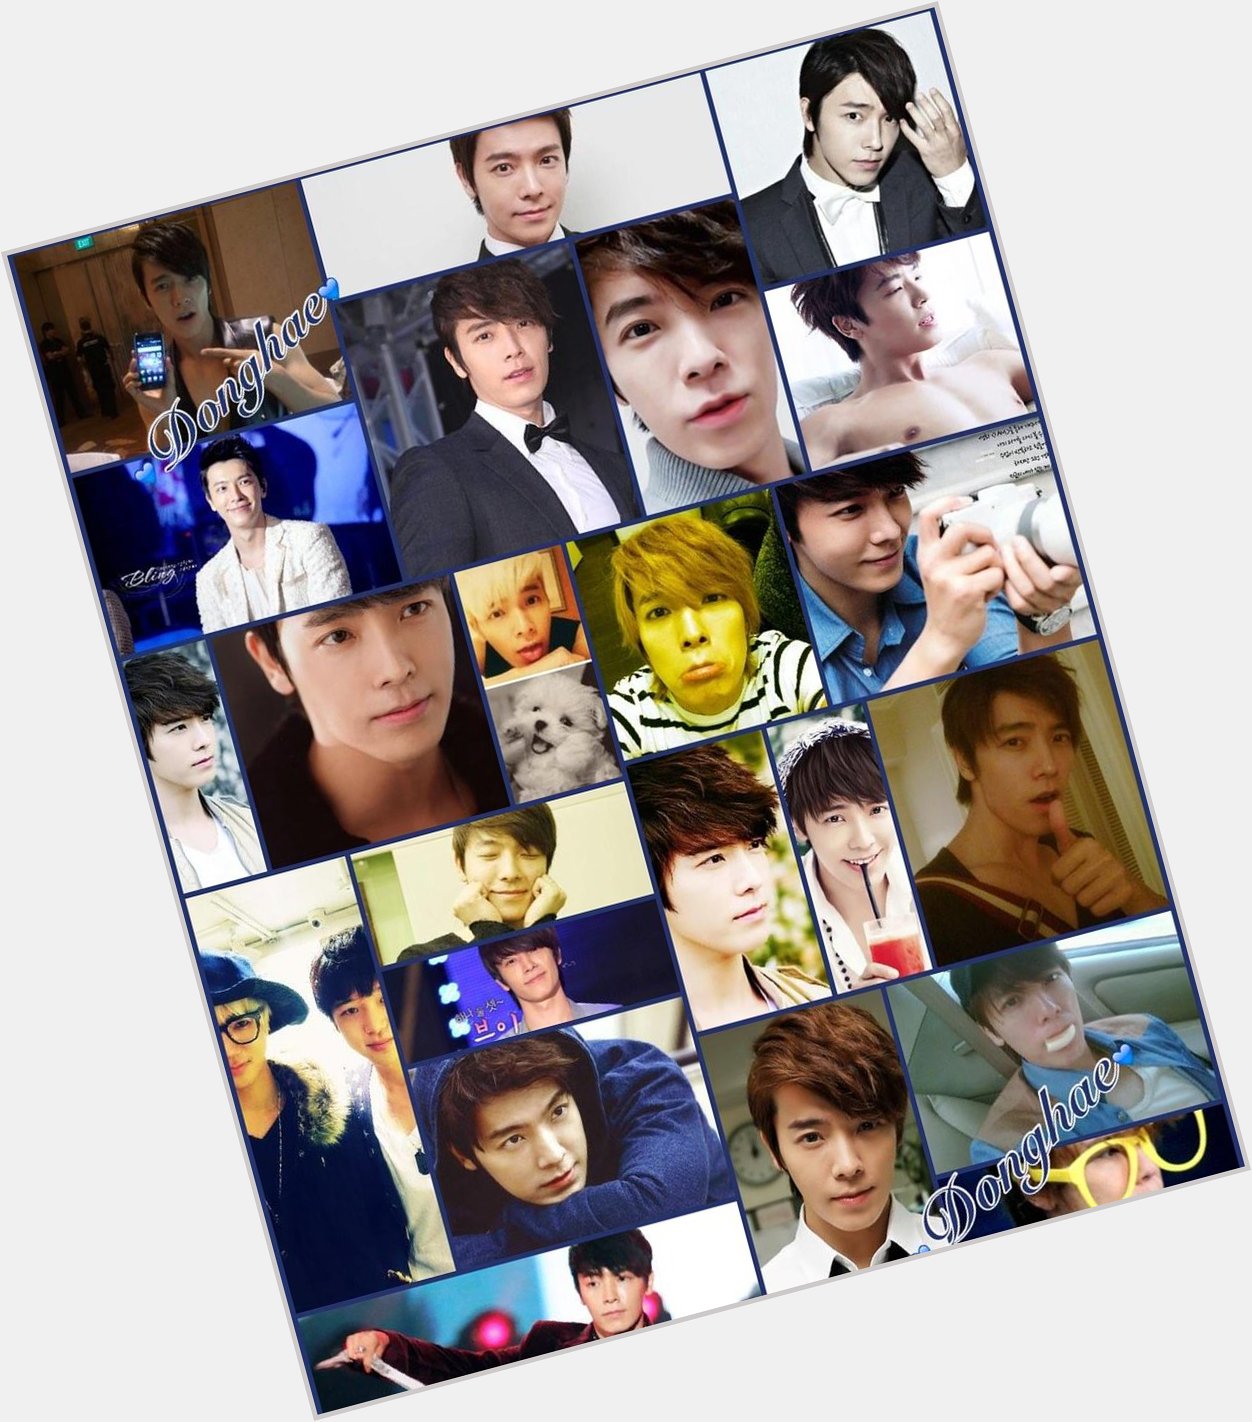 Happy bday LEE DONGHAE 
Take care & comeback soon   